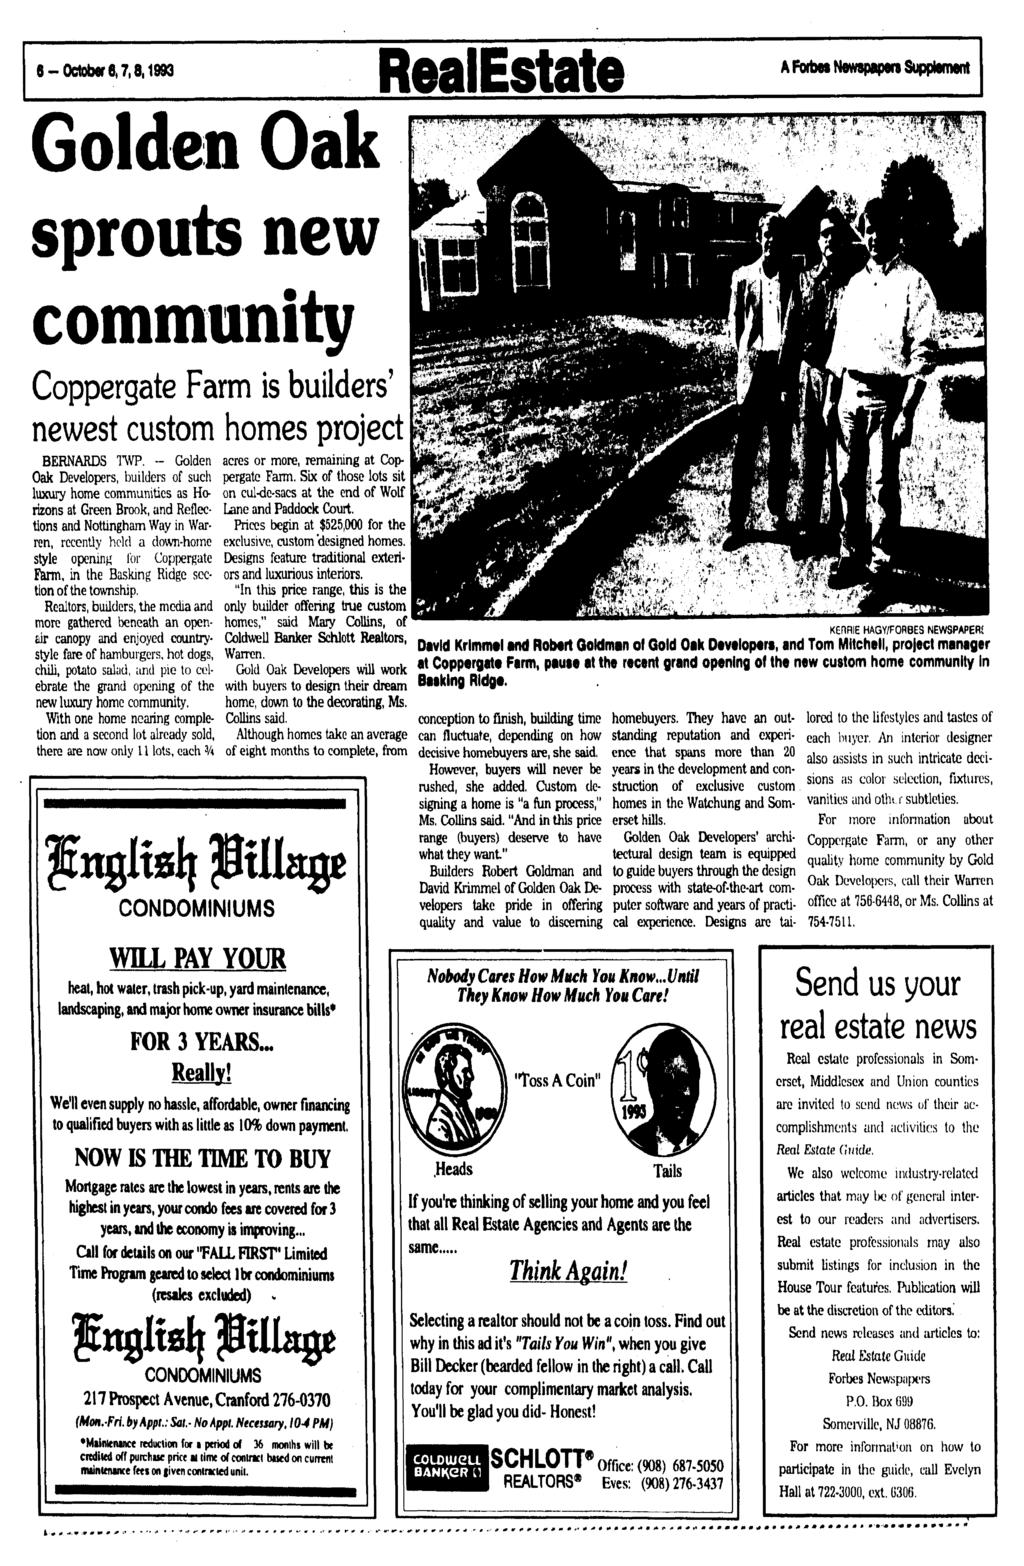 6-October 8,7,8,1993 RealEstate A Fbrbw Newspaper? Supplement Golden Oak sprouts new community Coppergate Farm is builders' newest custom homes project BERNARDS TWP.